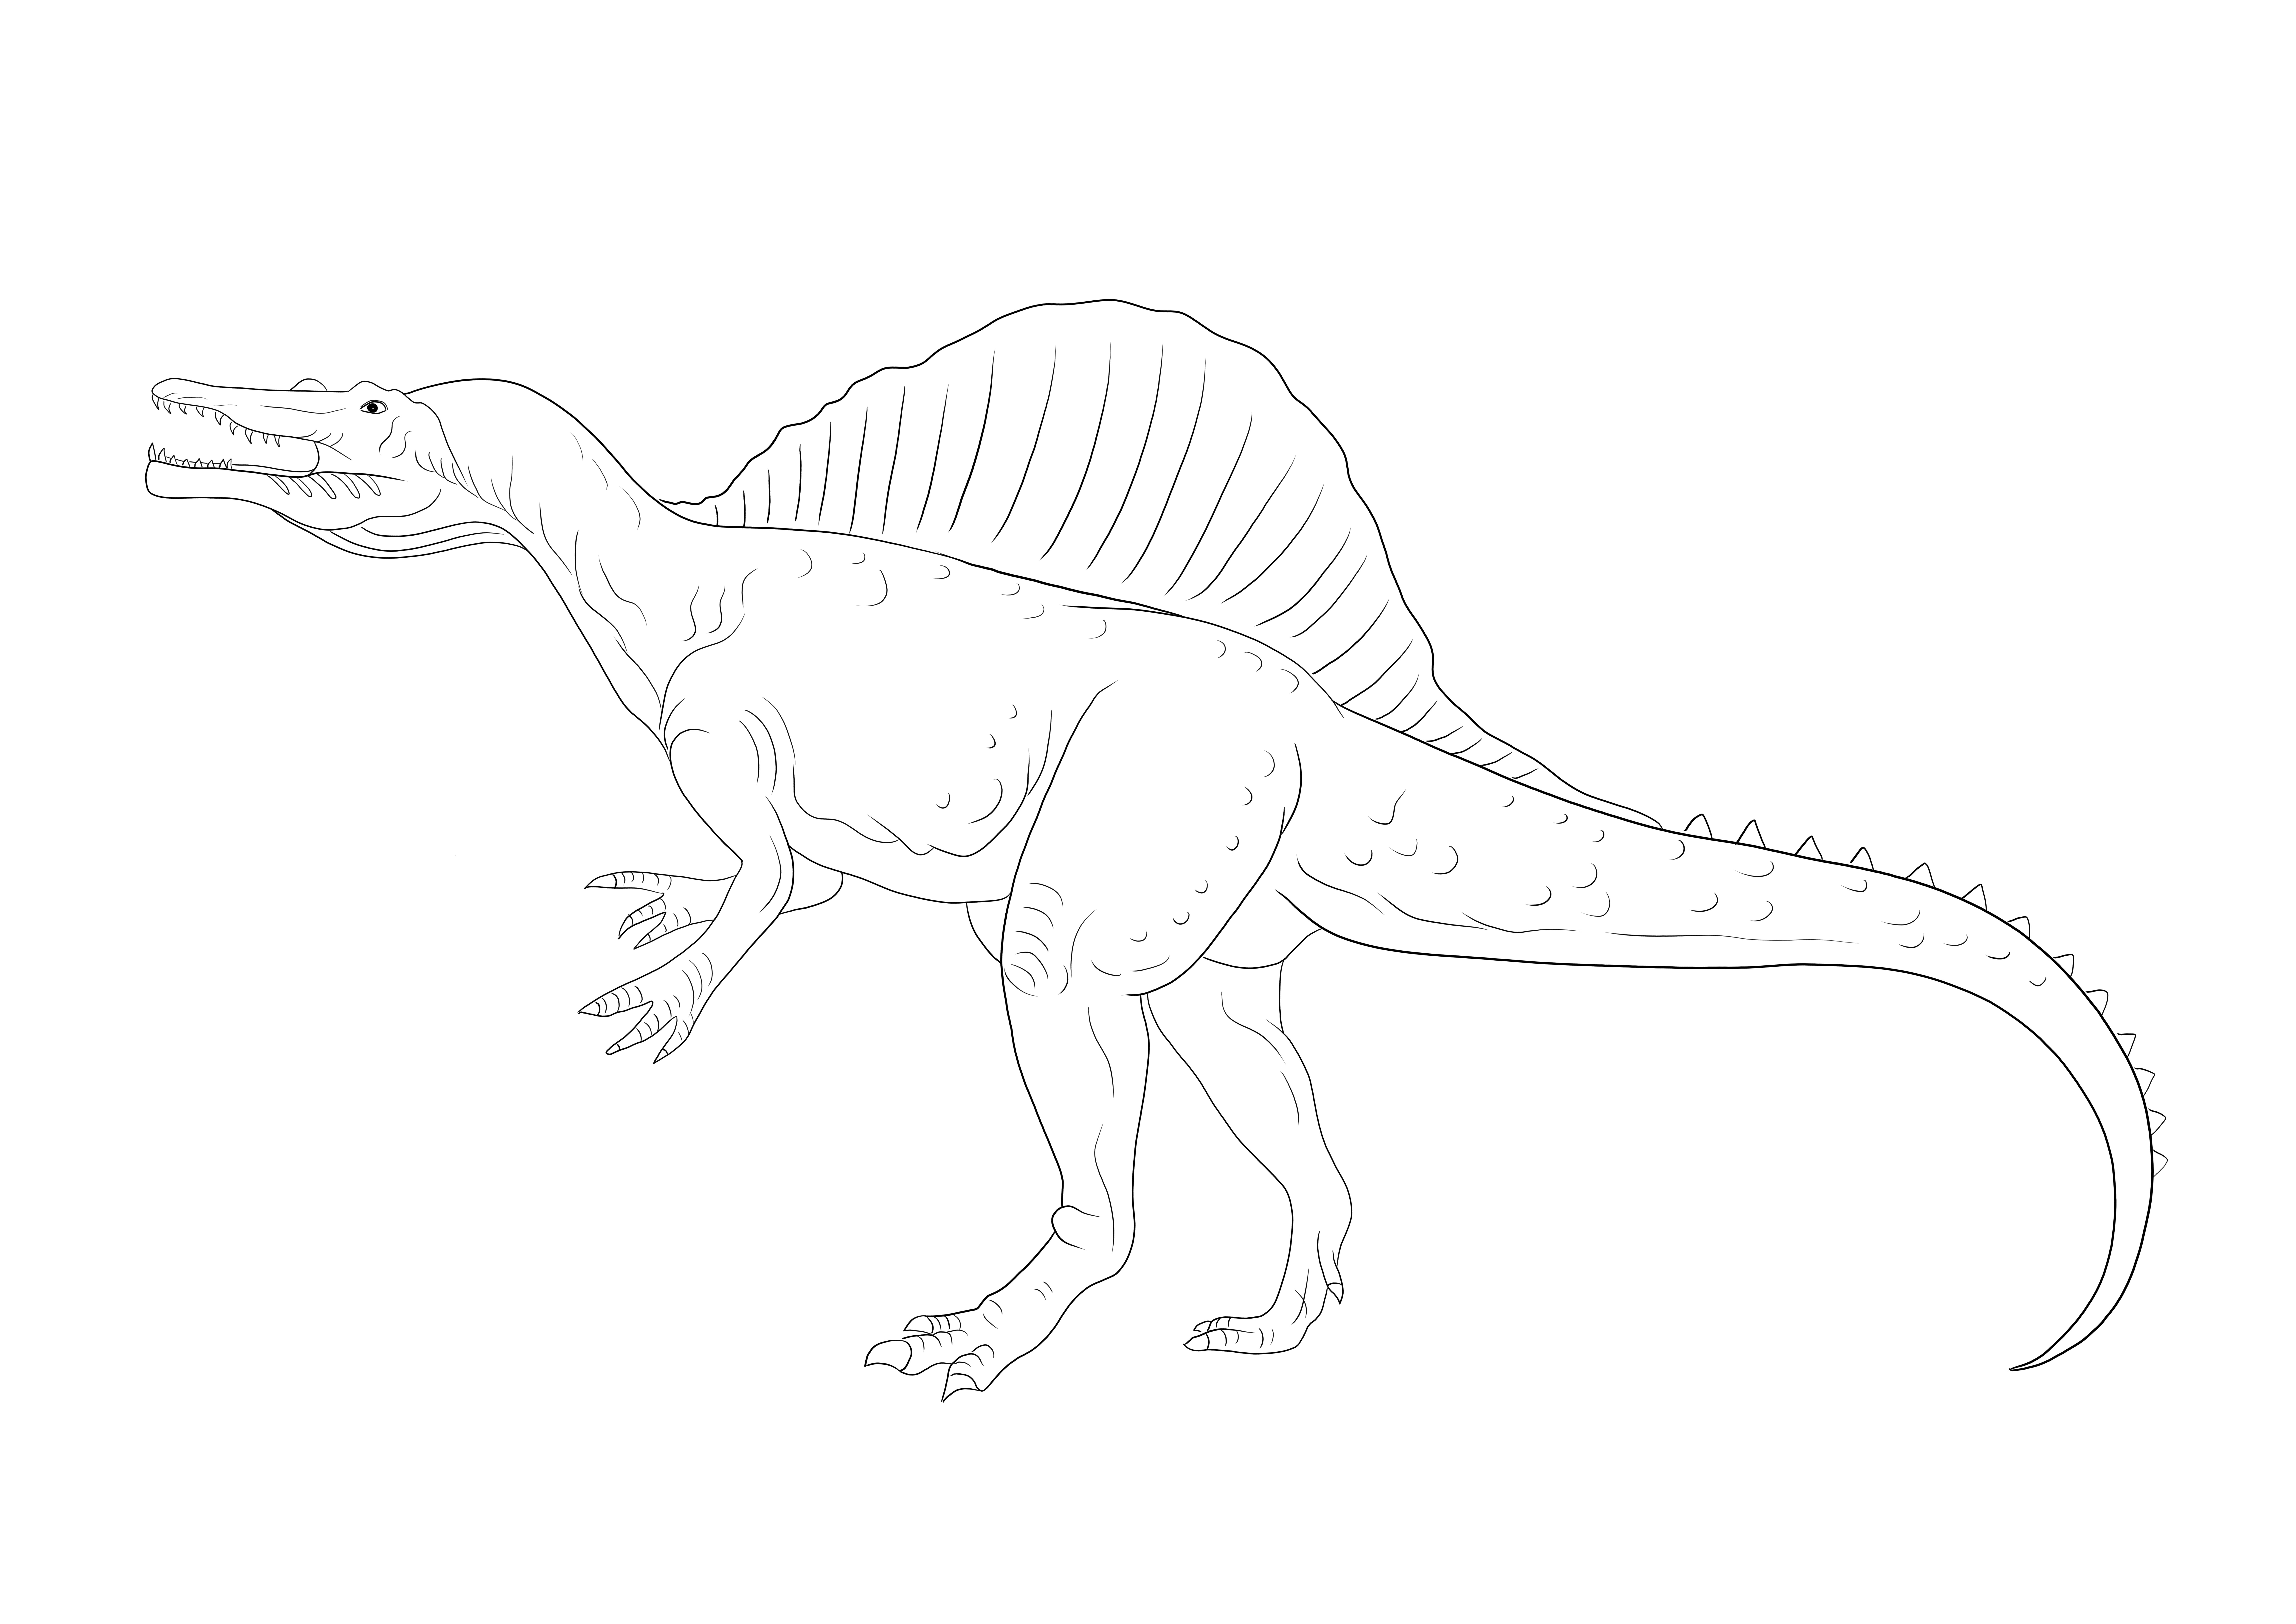 Fierce Spinosaurus coloring page to print or download for free